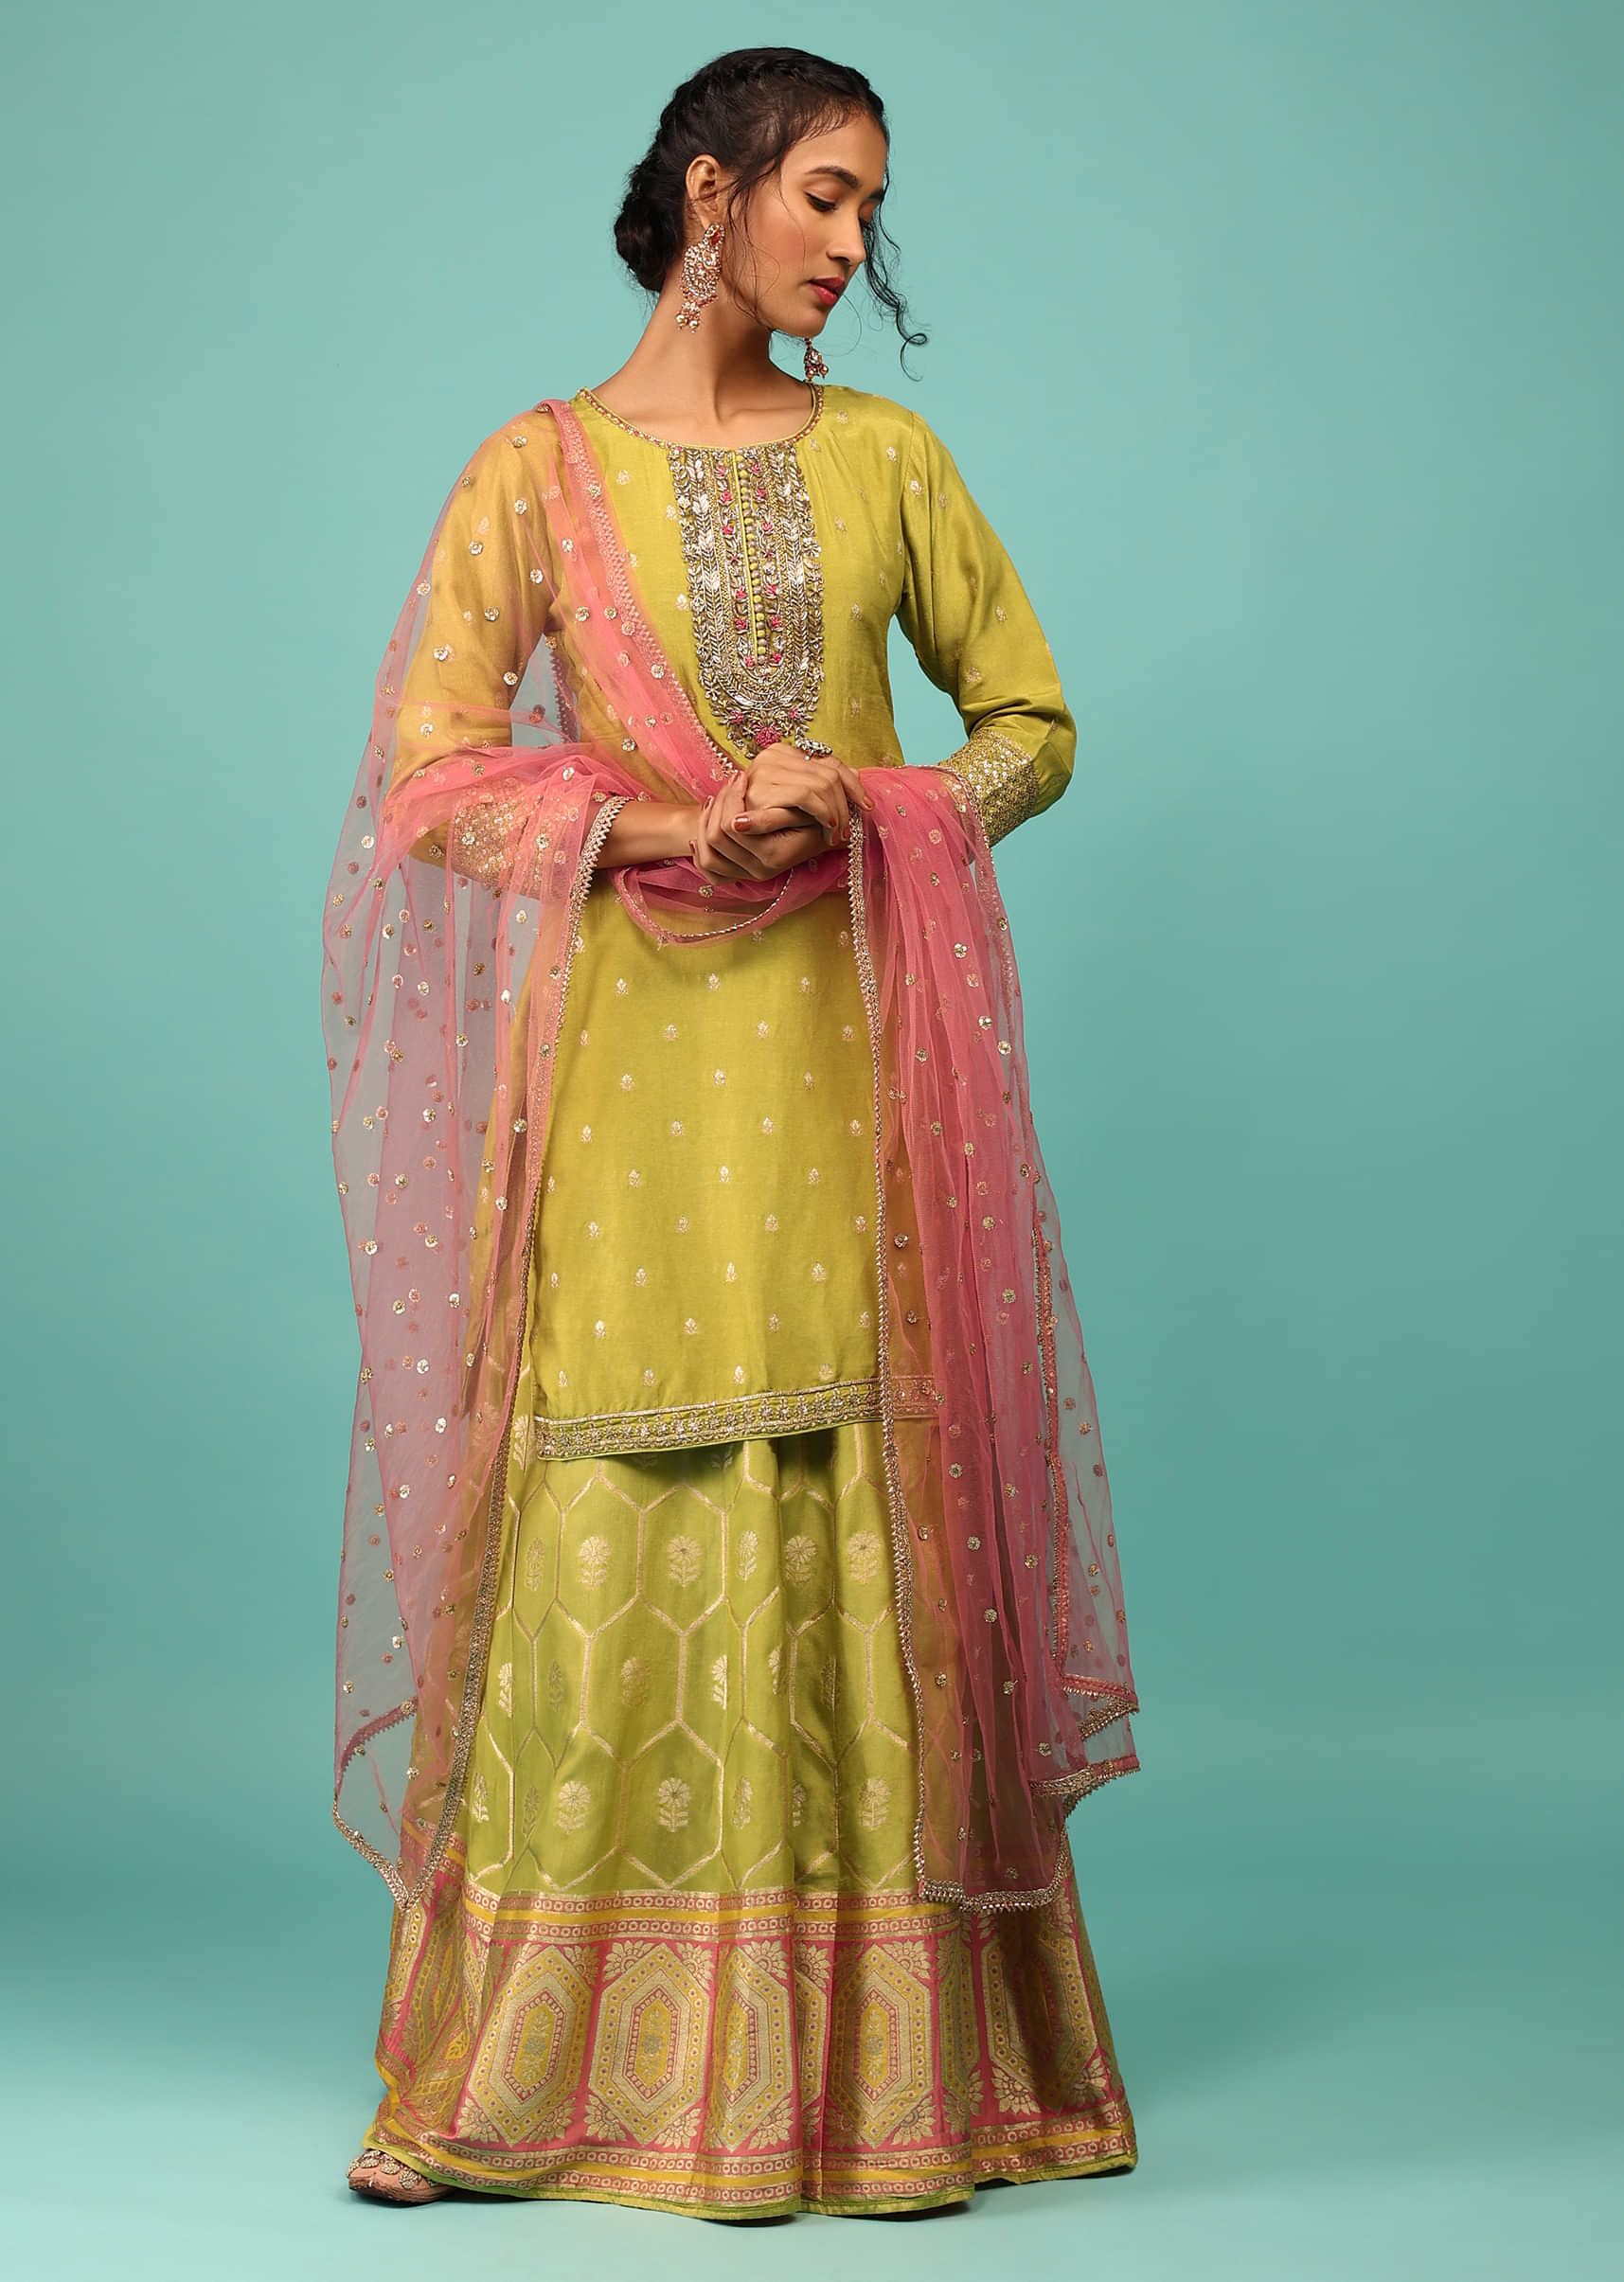 Lime Green Palazzo Suit In Dola Silk With Embroidery And Pink Net Dupatta